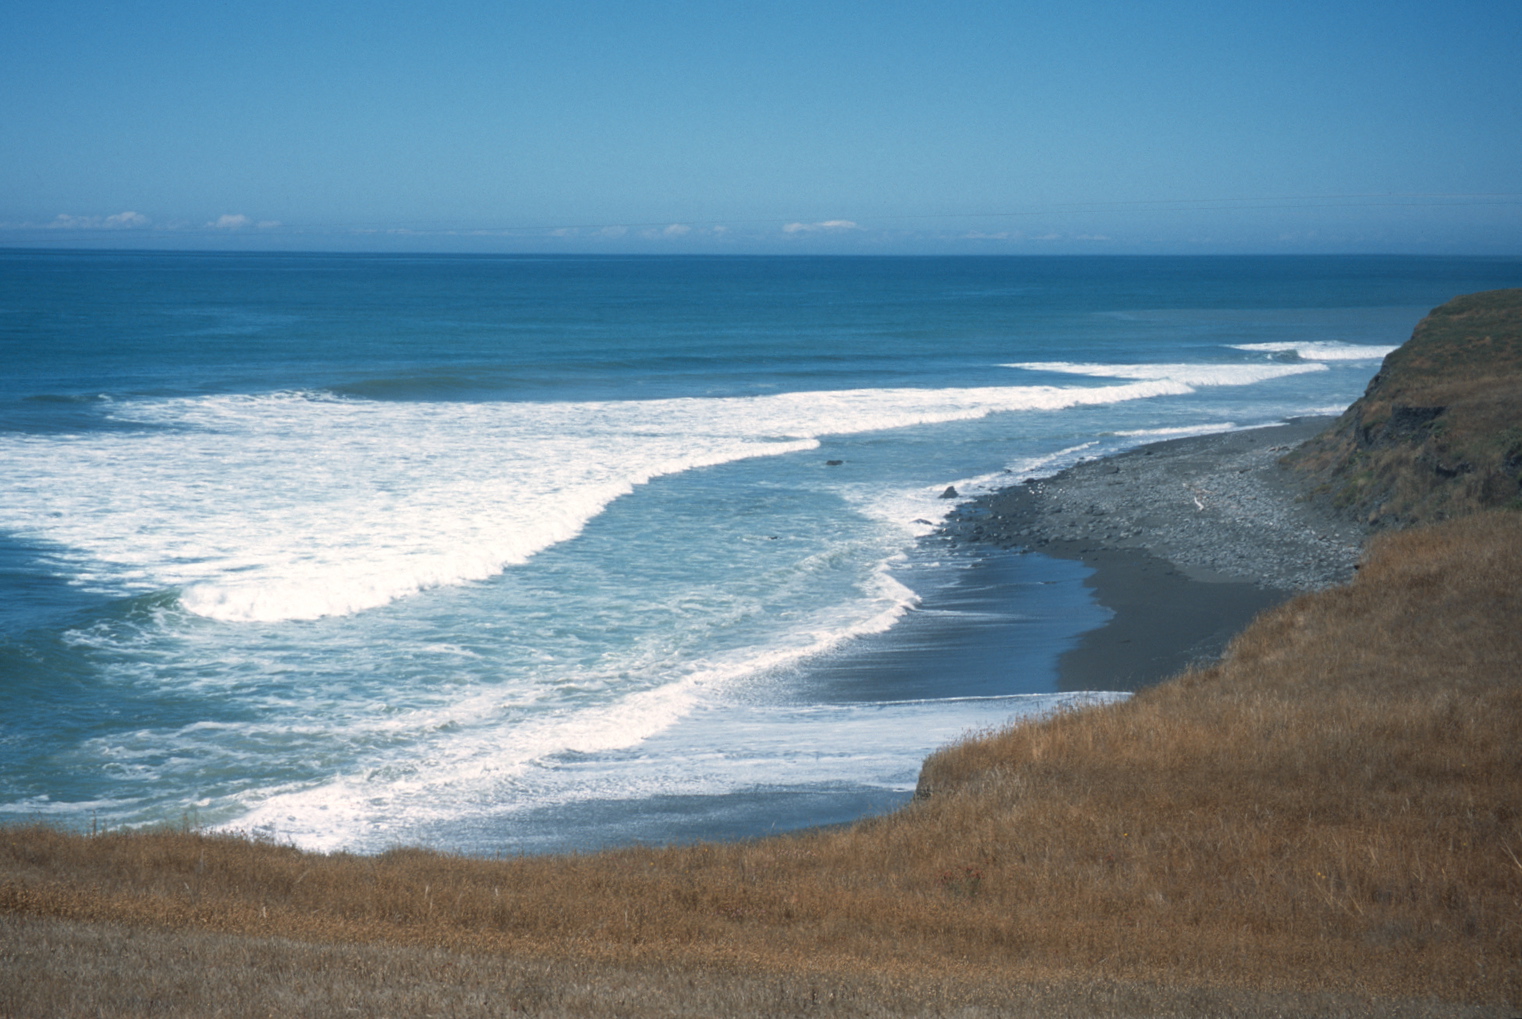 The Lost Coast Trail offers access to many pocket beaches that provide solitude for walkers.